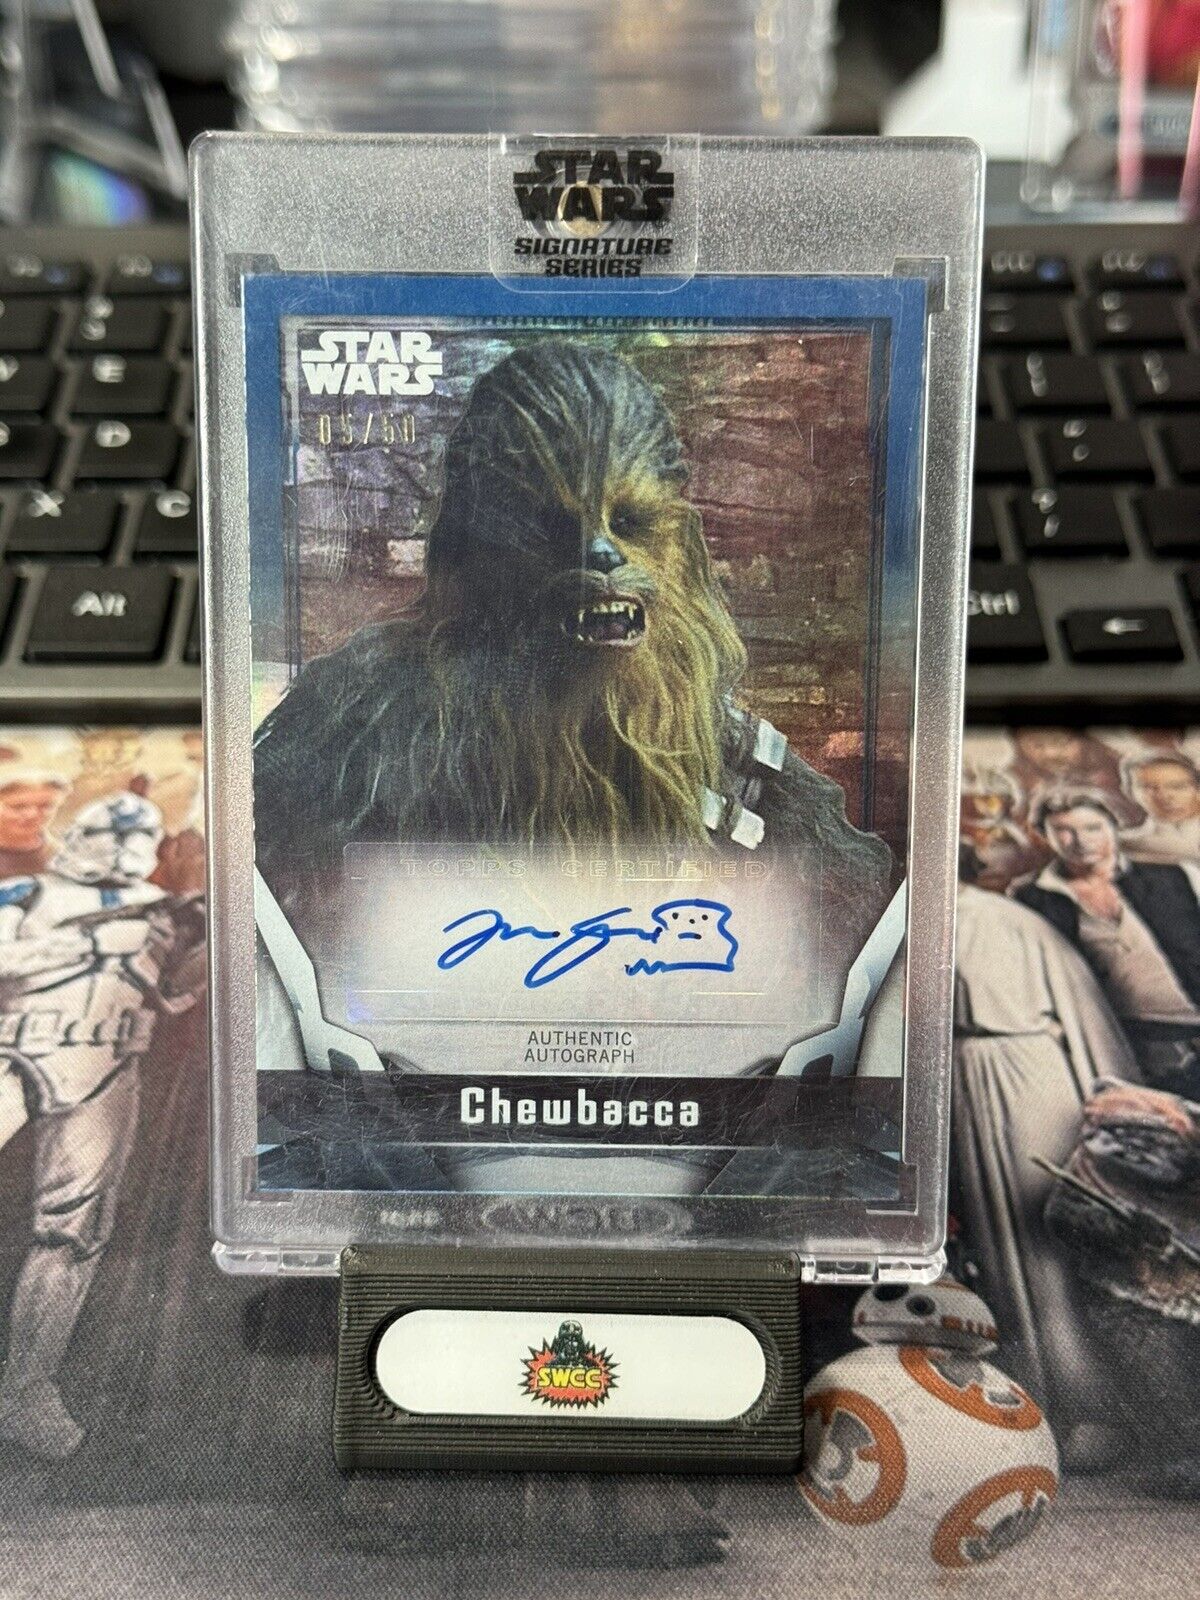 2021 Topps Star Wars Signature Series Chewbacca Autographed Card 5/50 Blue